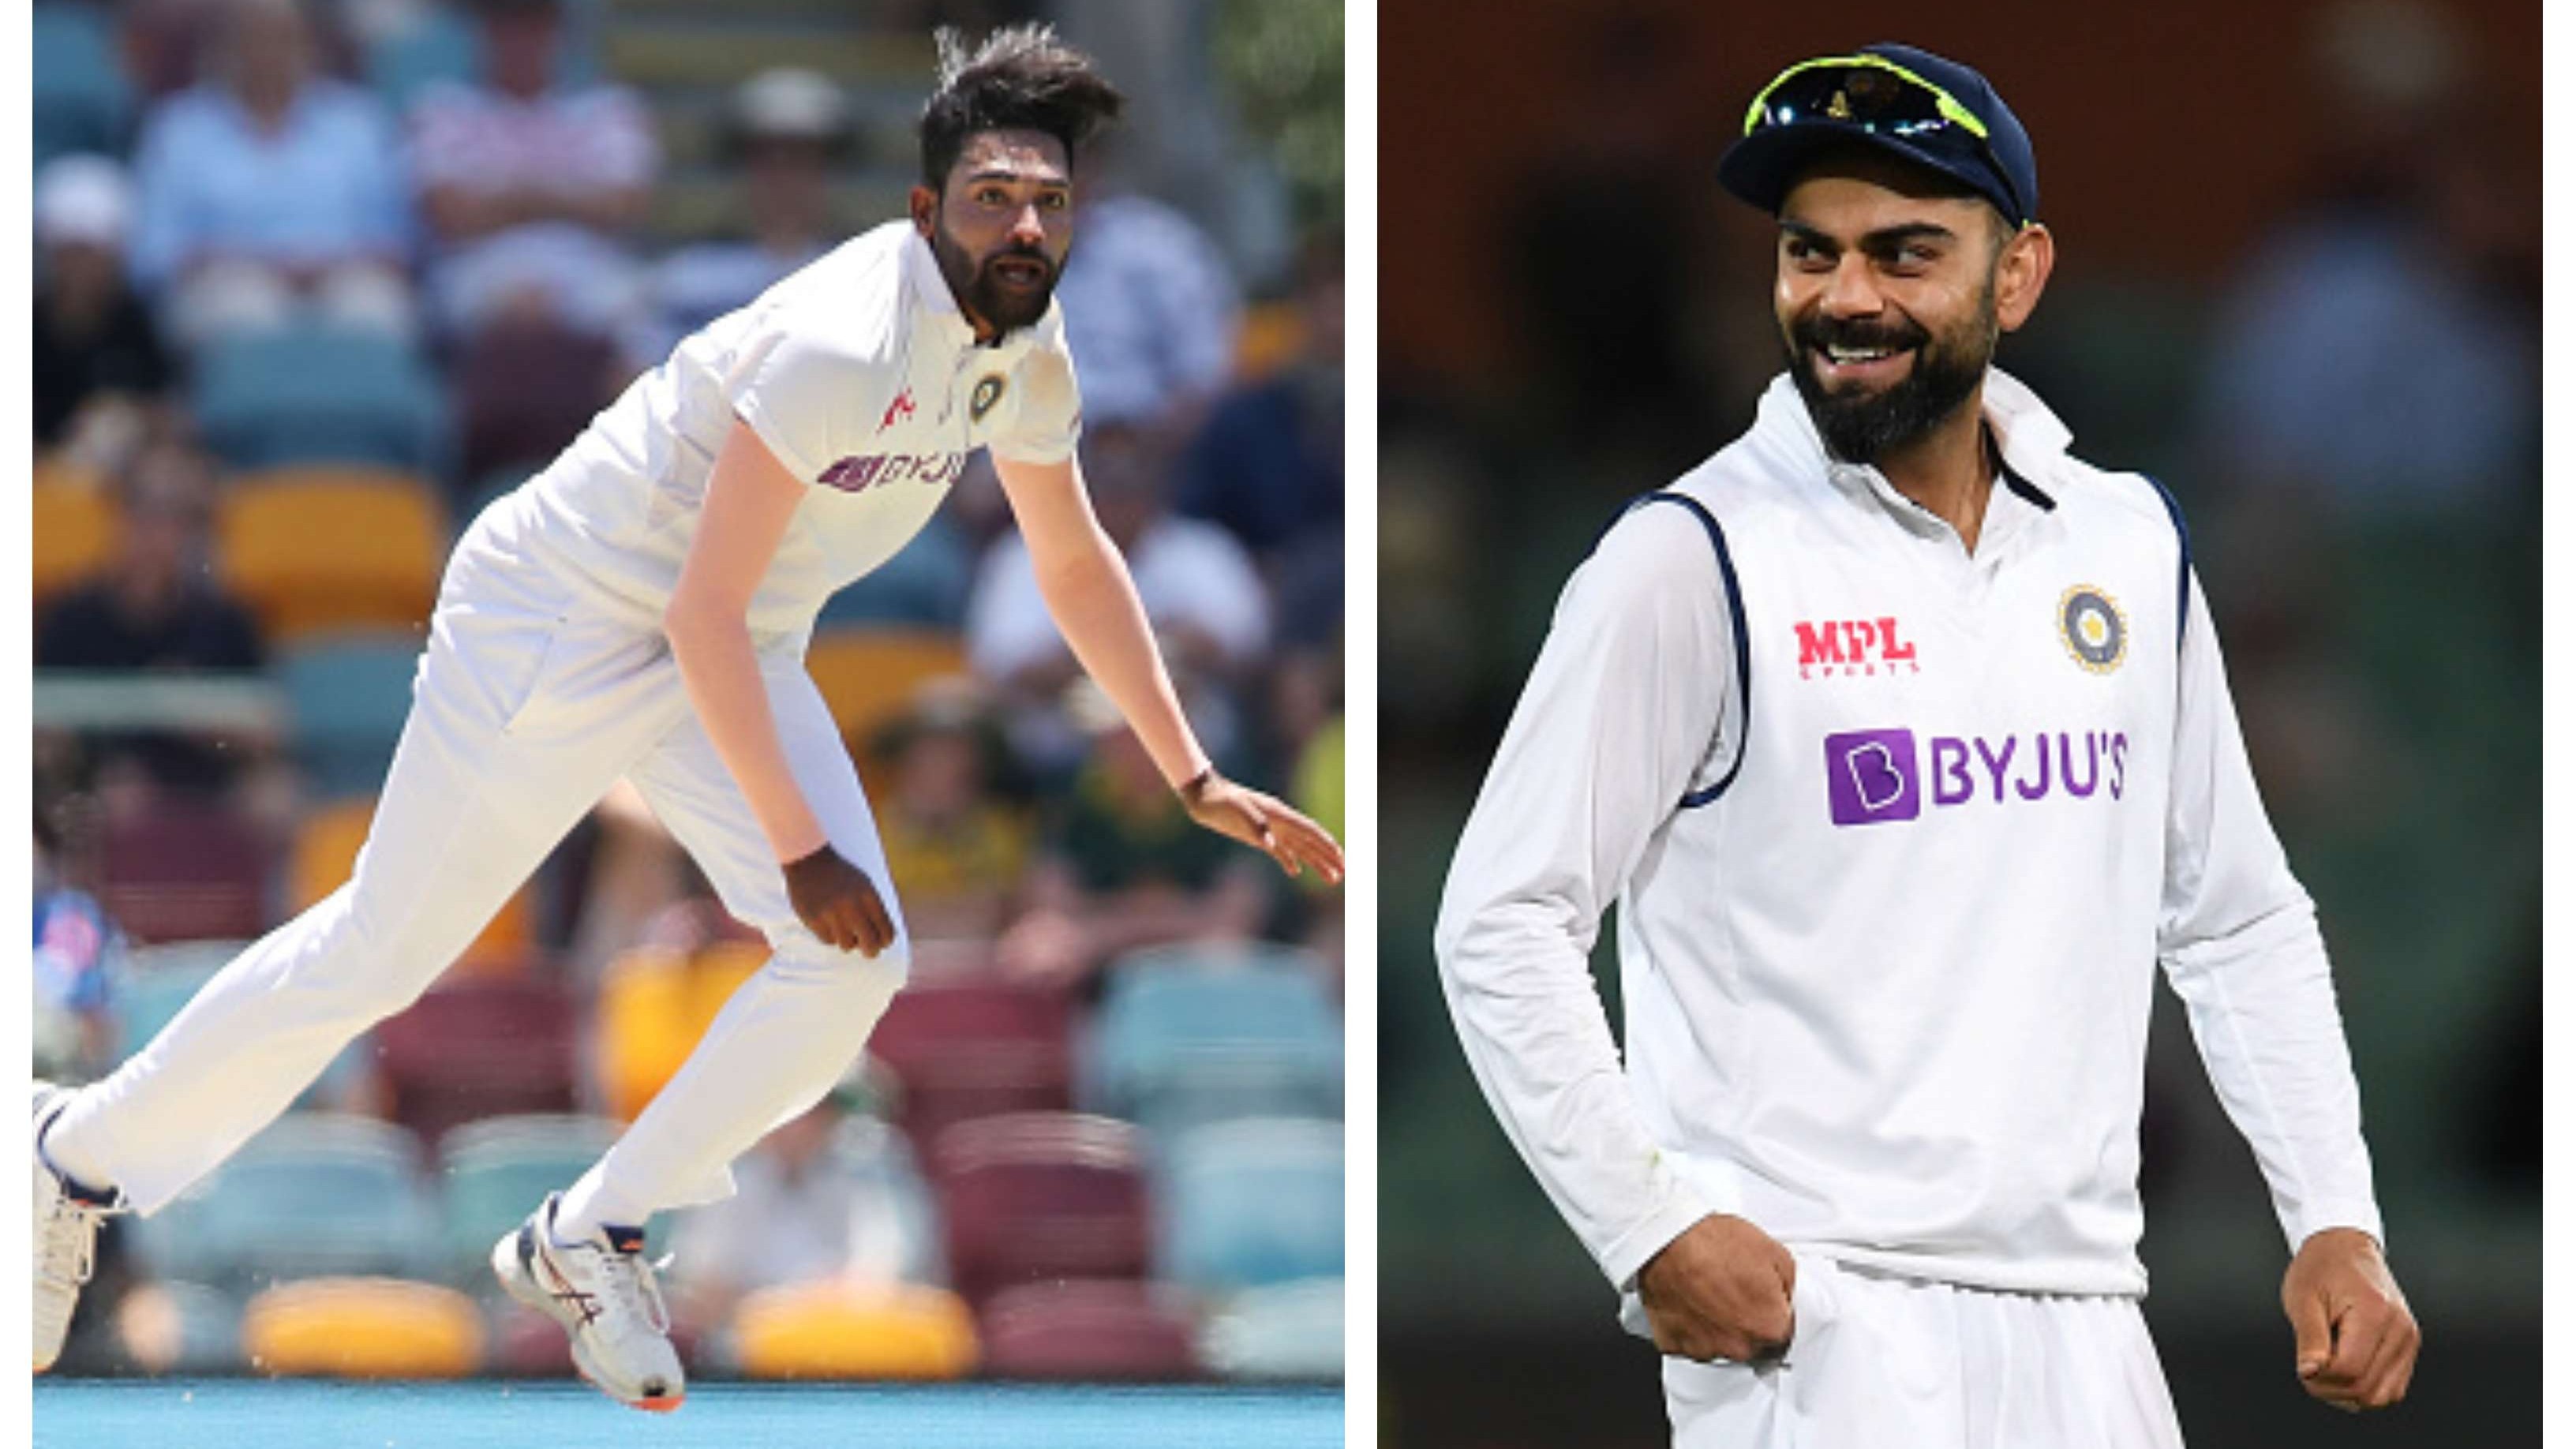 AUS v IND 2020-21: ‘Virat bhai always told me that I have the ability to perform on big stage’, says Mohammed Siraj